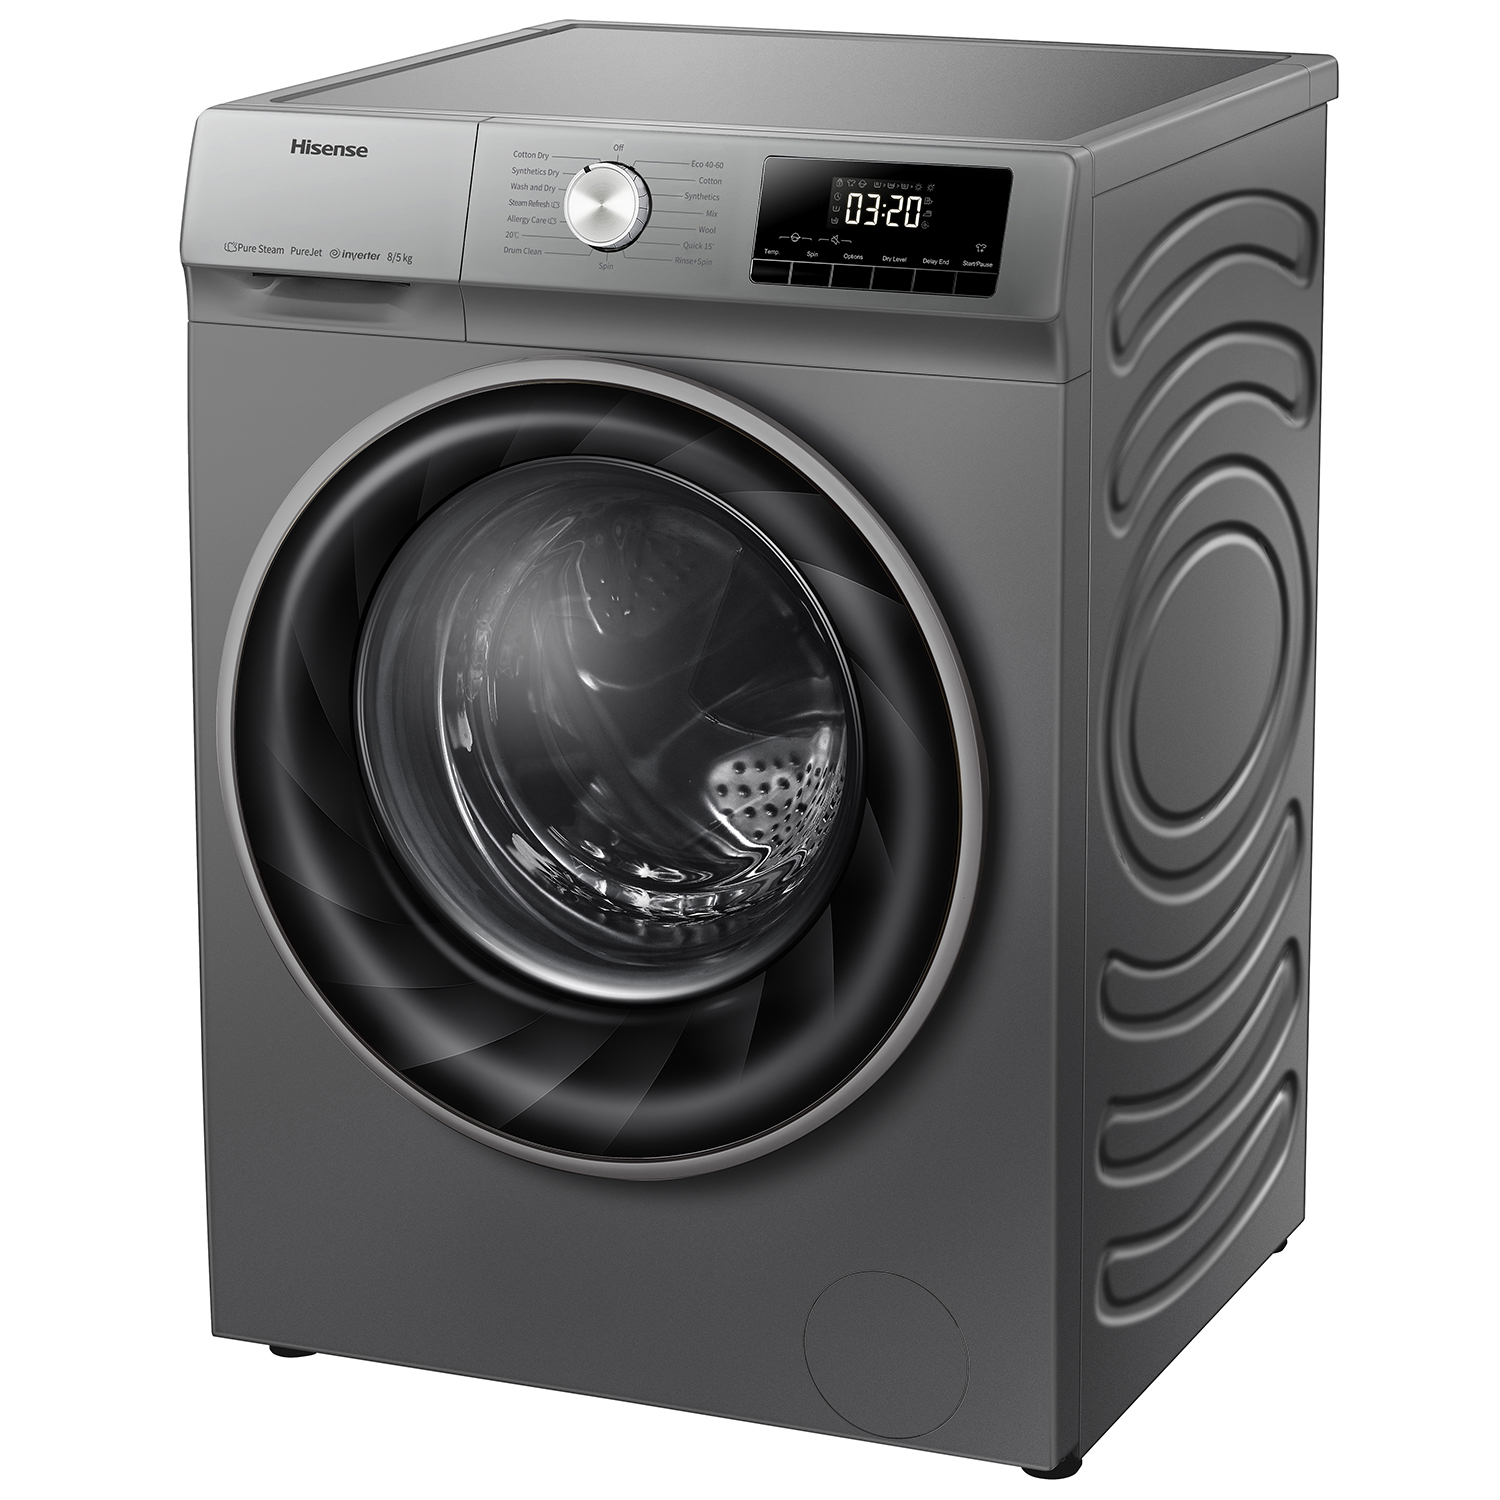 Hisense Dual Inverter Front Load 2 in 1 (8kg washer and 5kg dryer) WDQY8014EVJM- Best Front Load Washing Machine Malaysia: Top Picks for 2023- Shop Journey